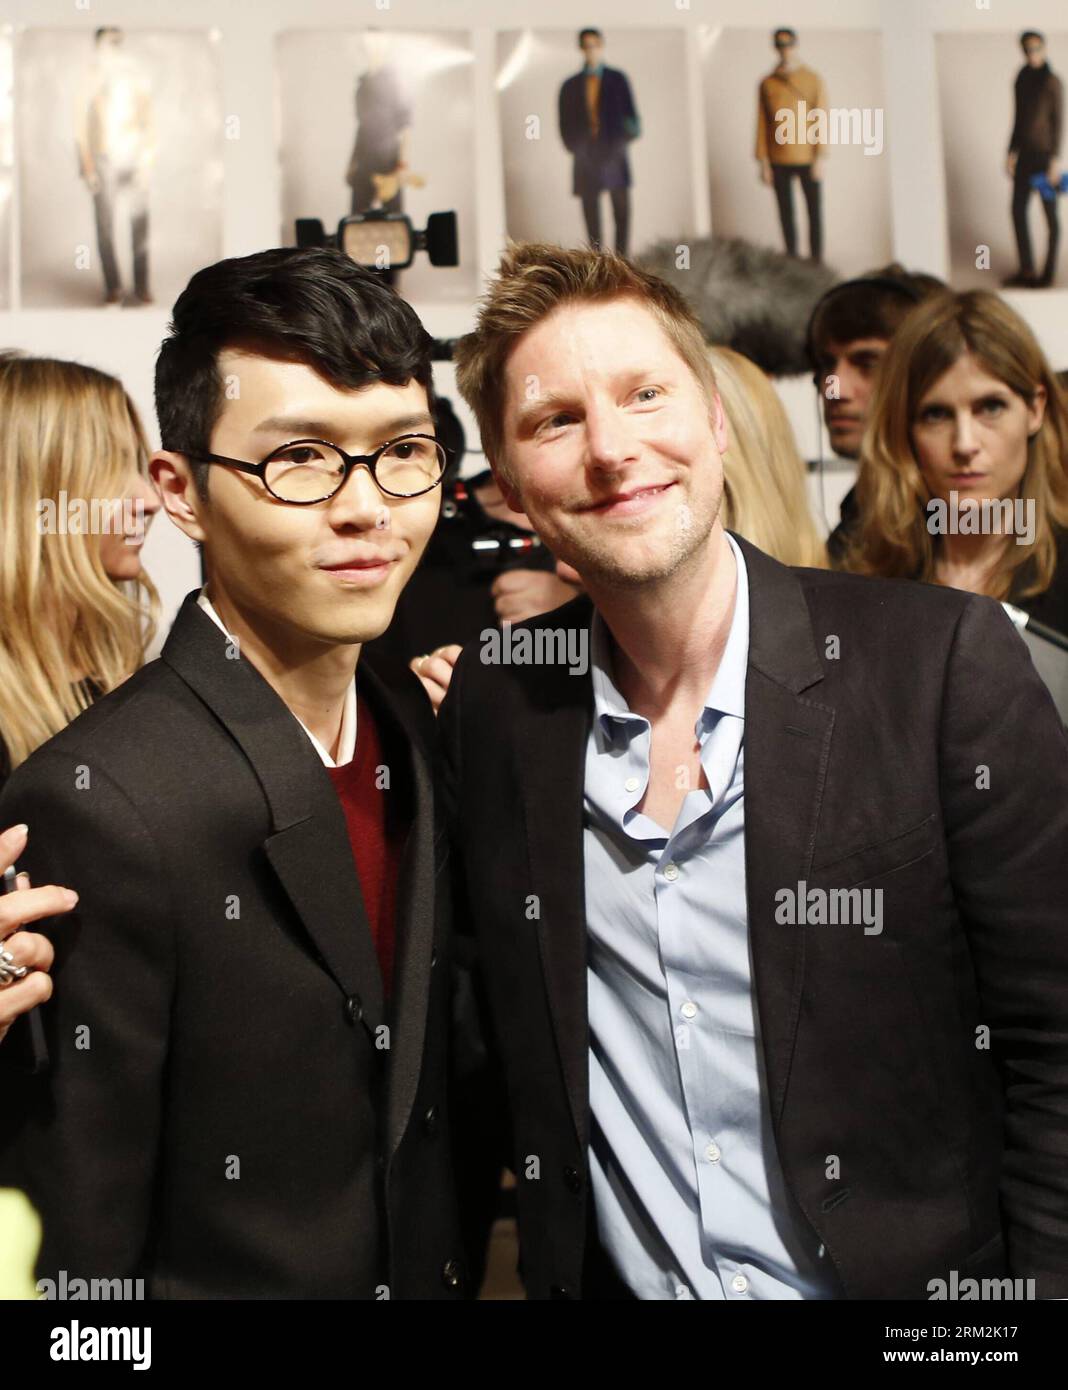 LONDON, June 18, 2013 - Khalil Fong (L), singer and songwriter from Chinese Hong Kong, and Burberry Chief Creative Officer Christopher Bailey pose backstage at Burberry Menswear Spring/Summer 2014 at Kensington Gardens in London, Britain on June 18, 2013. (Xinhua/Wang Lili) BRITAIN-LONDON-FASHION-MENSWEAR-BURBERRY PRORSUM PUBLICATIONxNOTxINxCHN Stock Photo